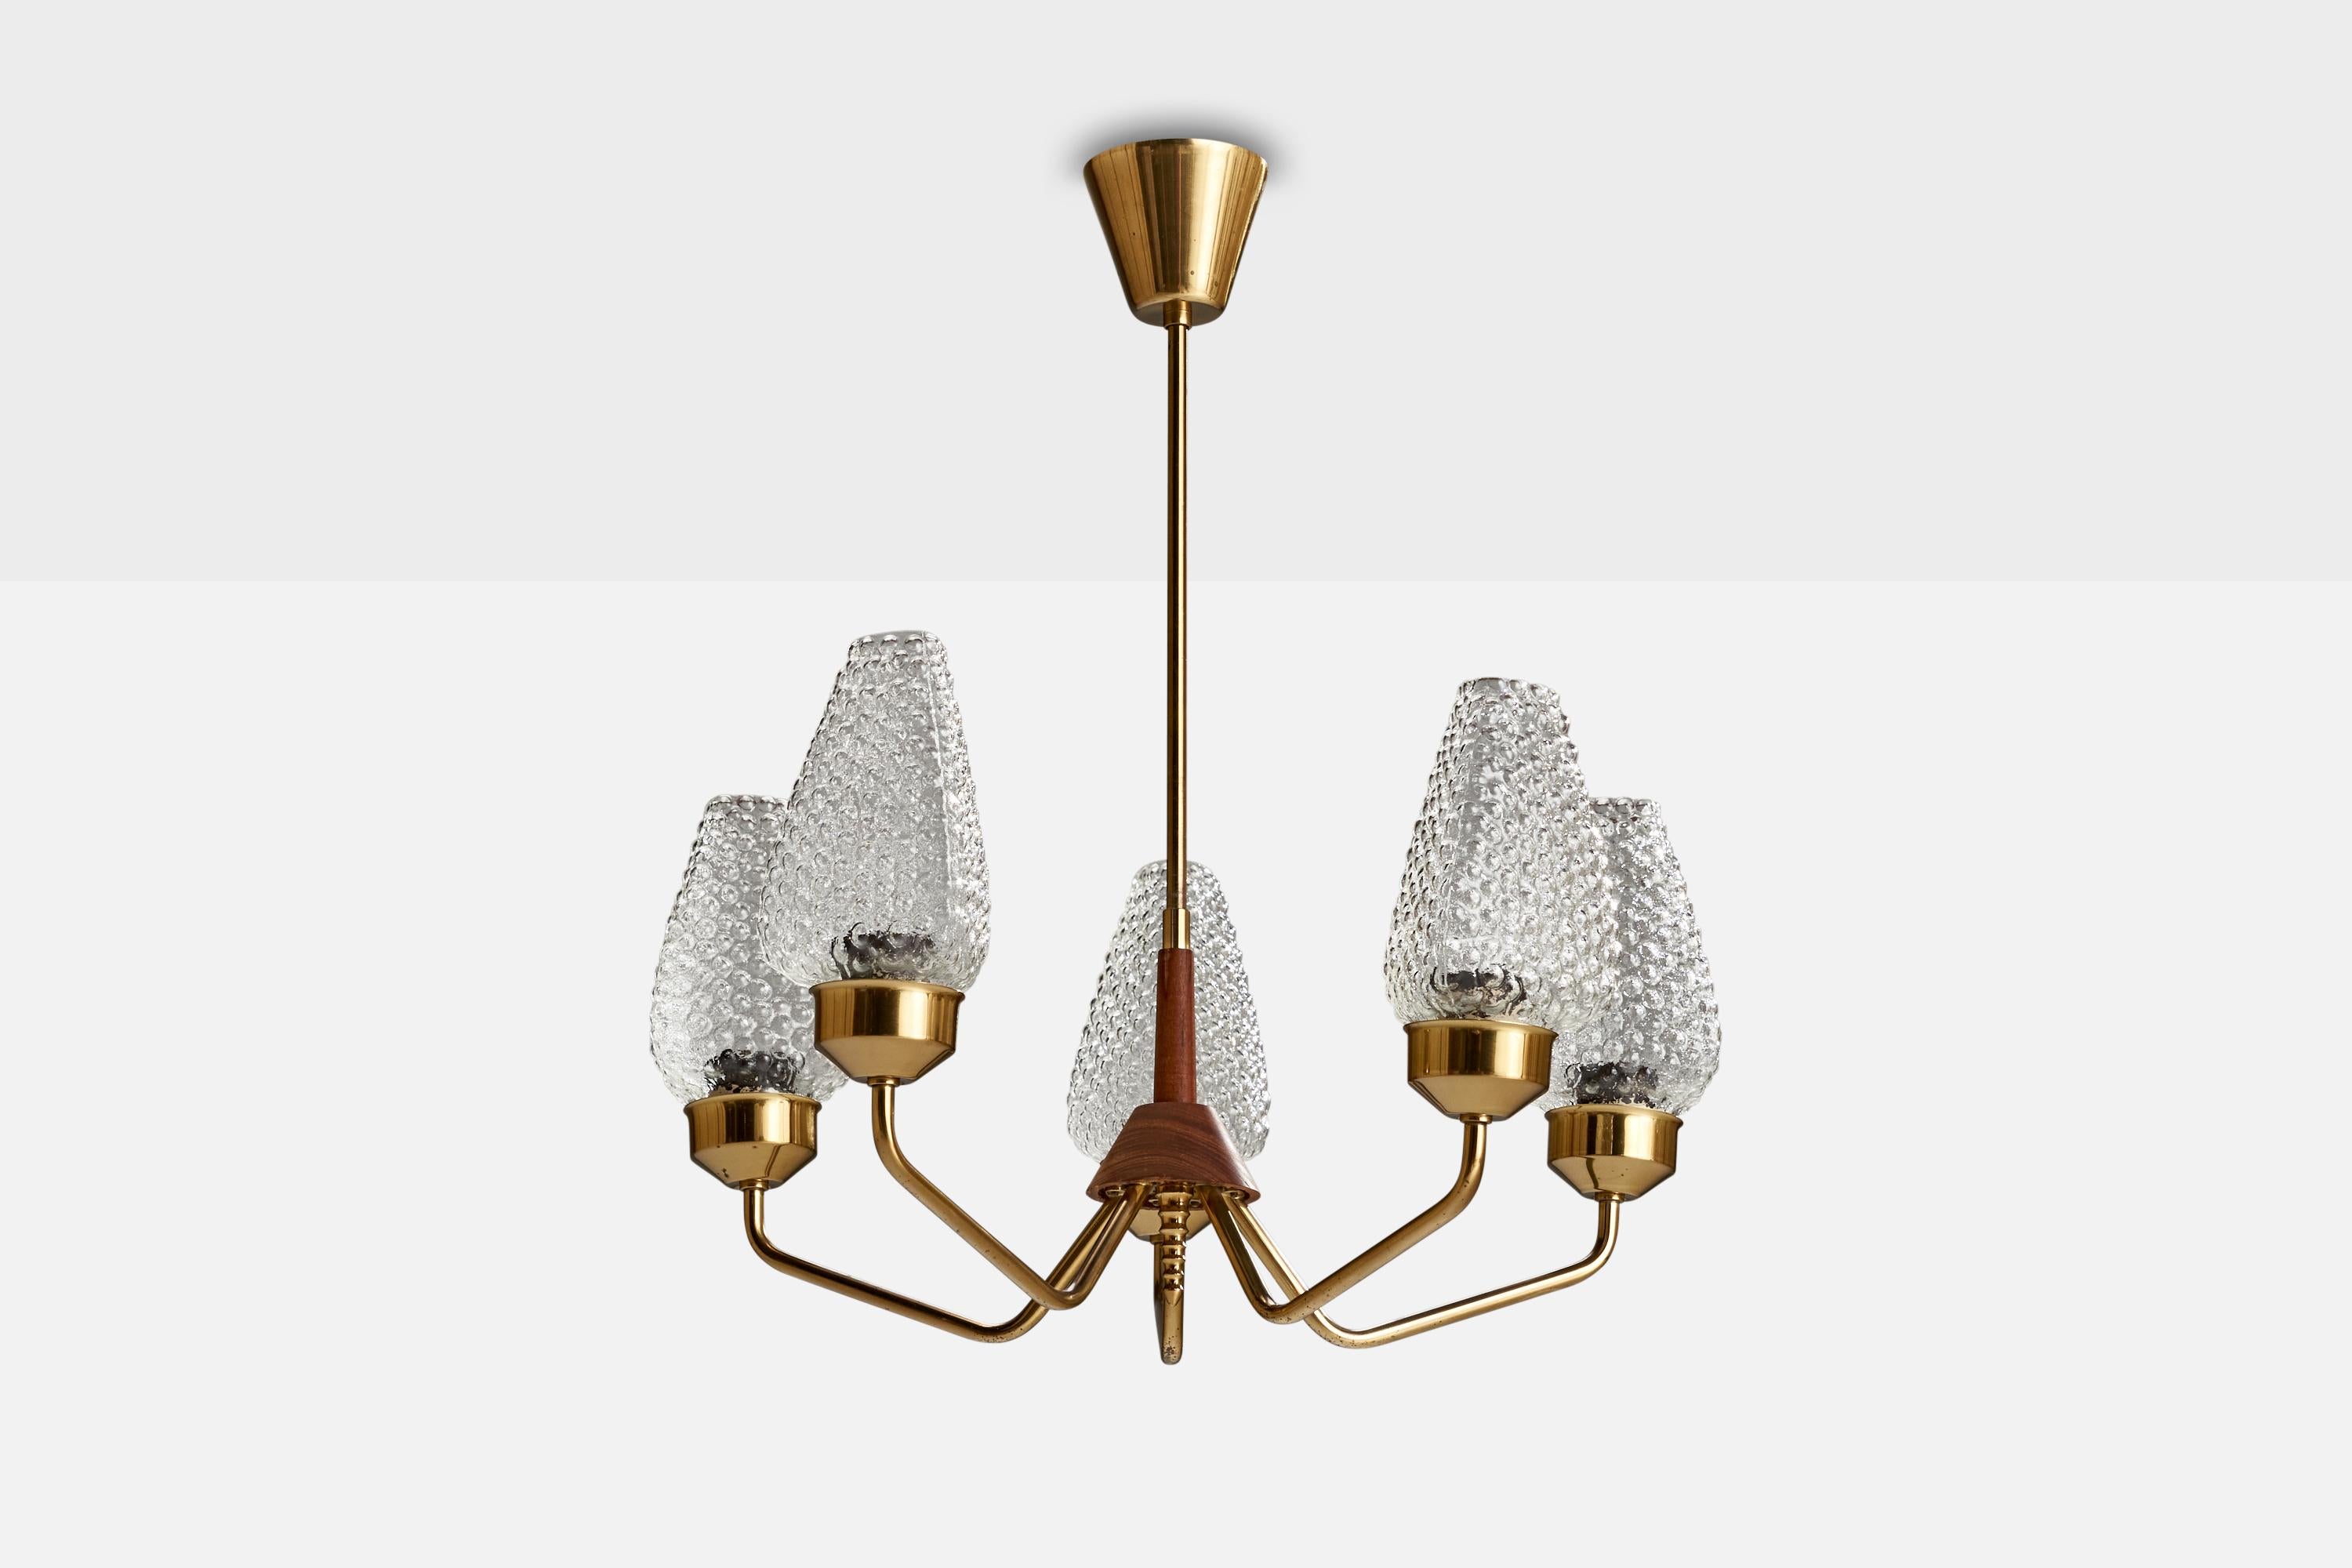 A brass, stained oak and glass chandelier designed and produced in Sweden, c. 1950s.

Dimensions of canopy (inches): 3.17” H x 3.55” Diameter
Socket takes standard E-26 bulbs. 5 socket.There is no maximum wattage stated on the fixture. All lighting